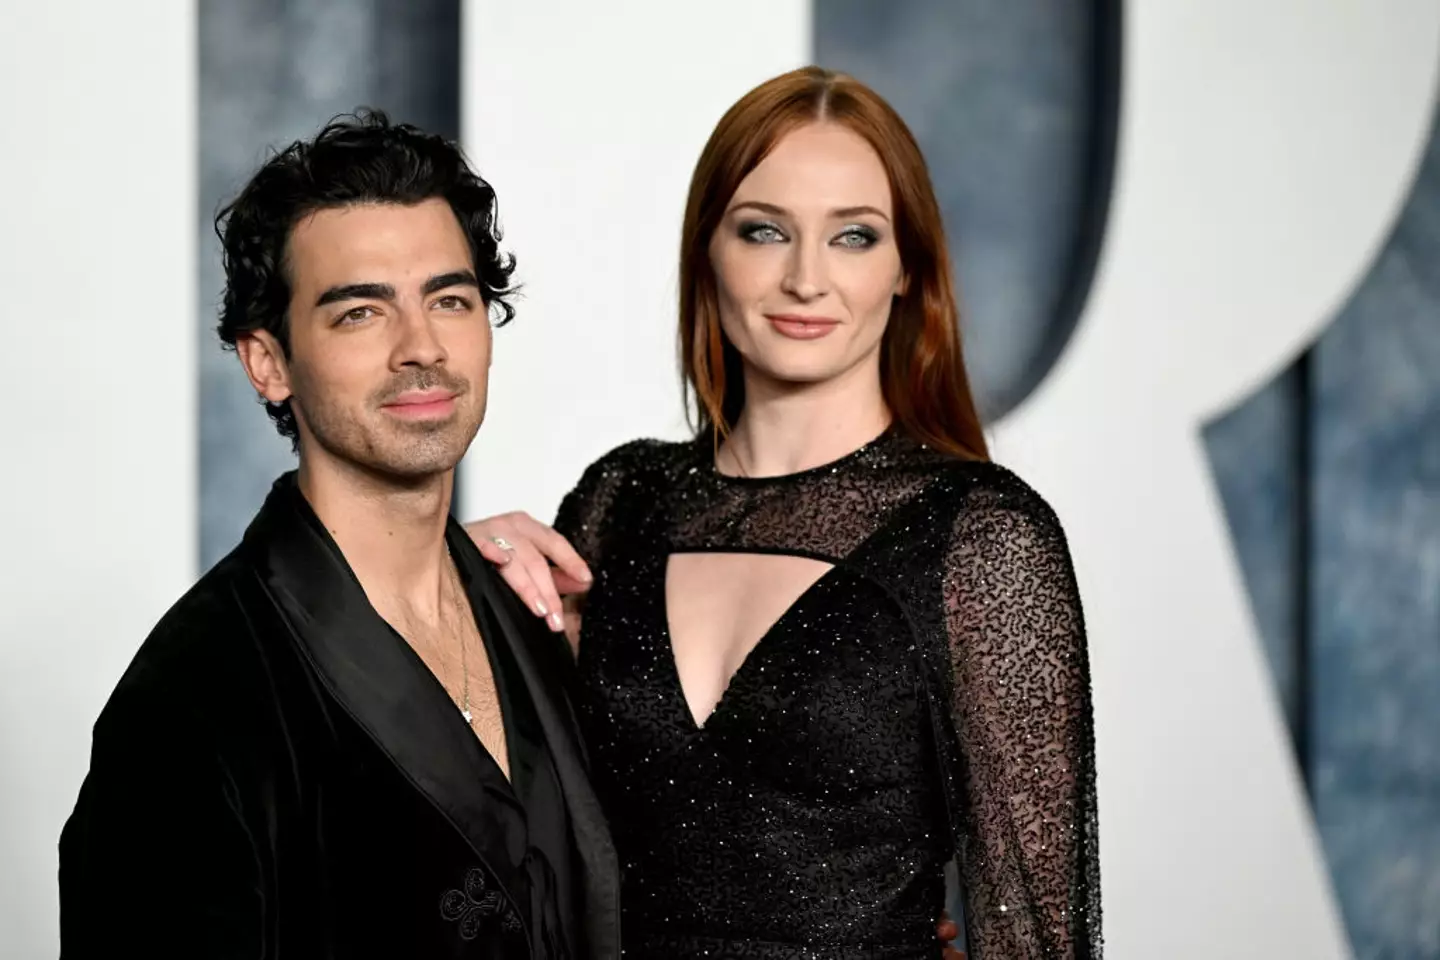 Joe Jonas and the Game of Thrones star parted ways last year after four years of marriage.